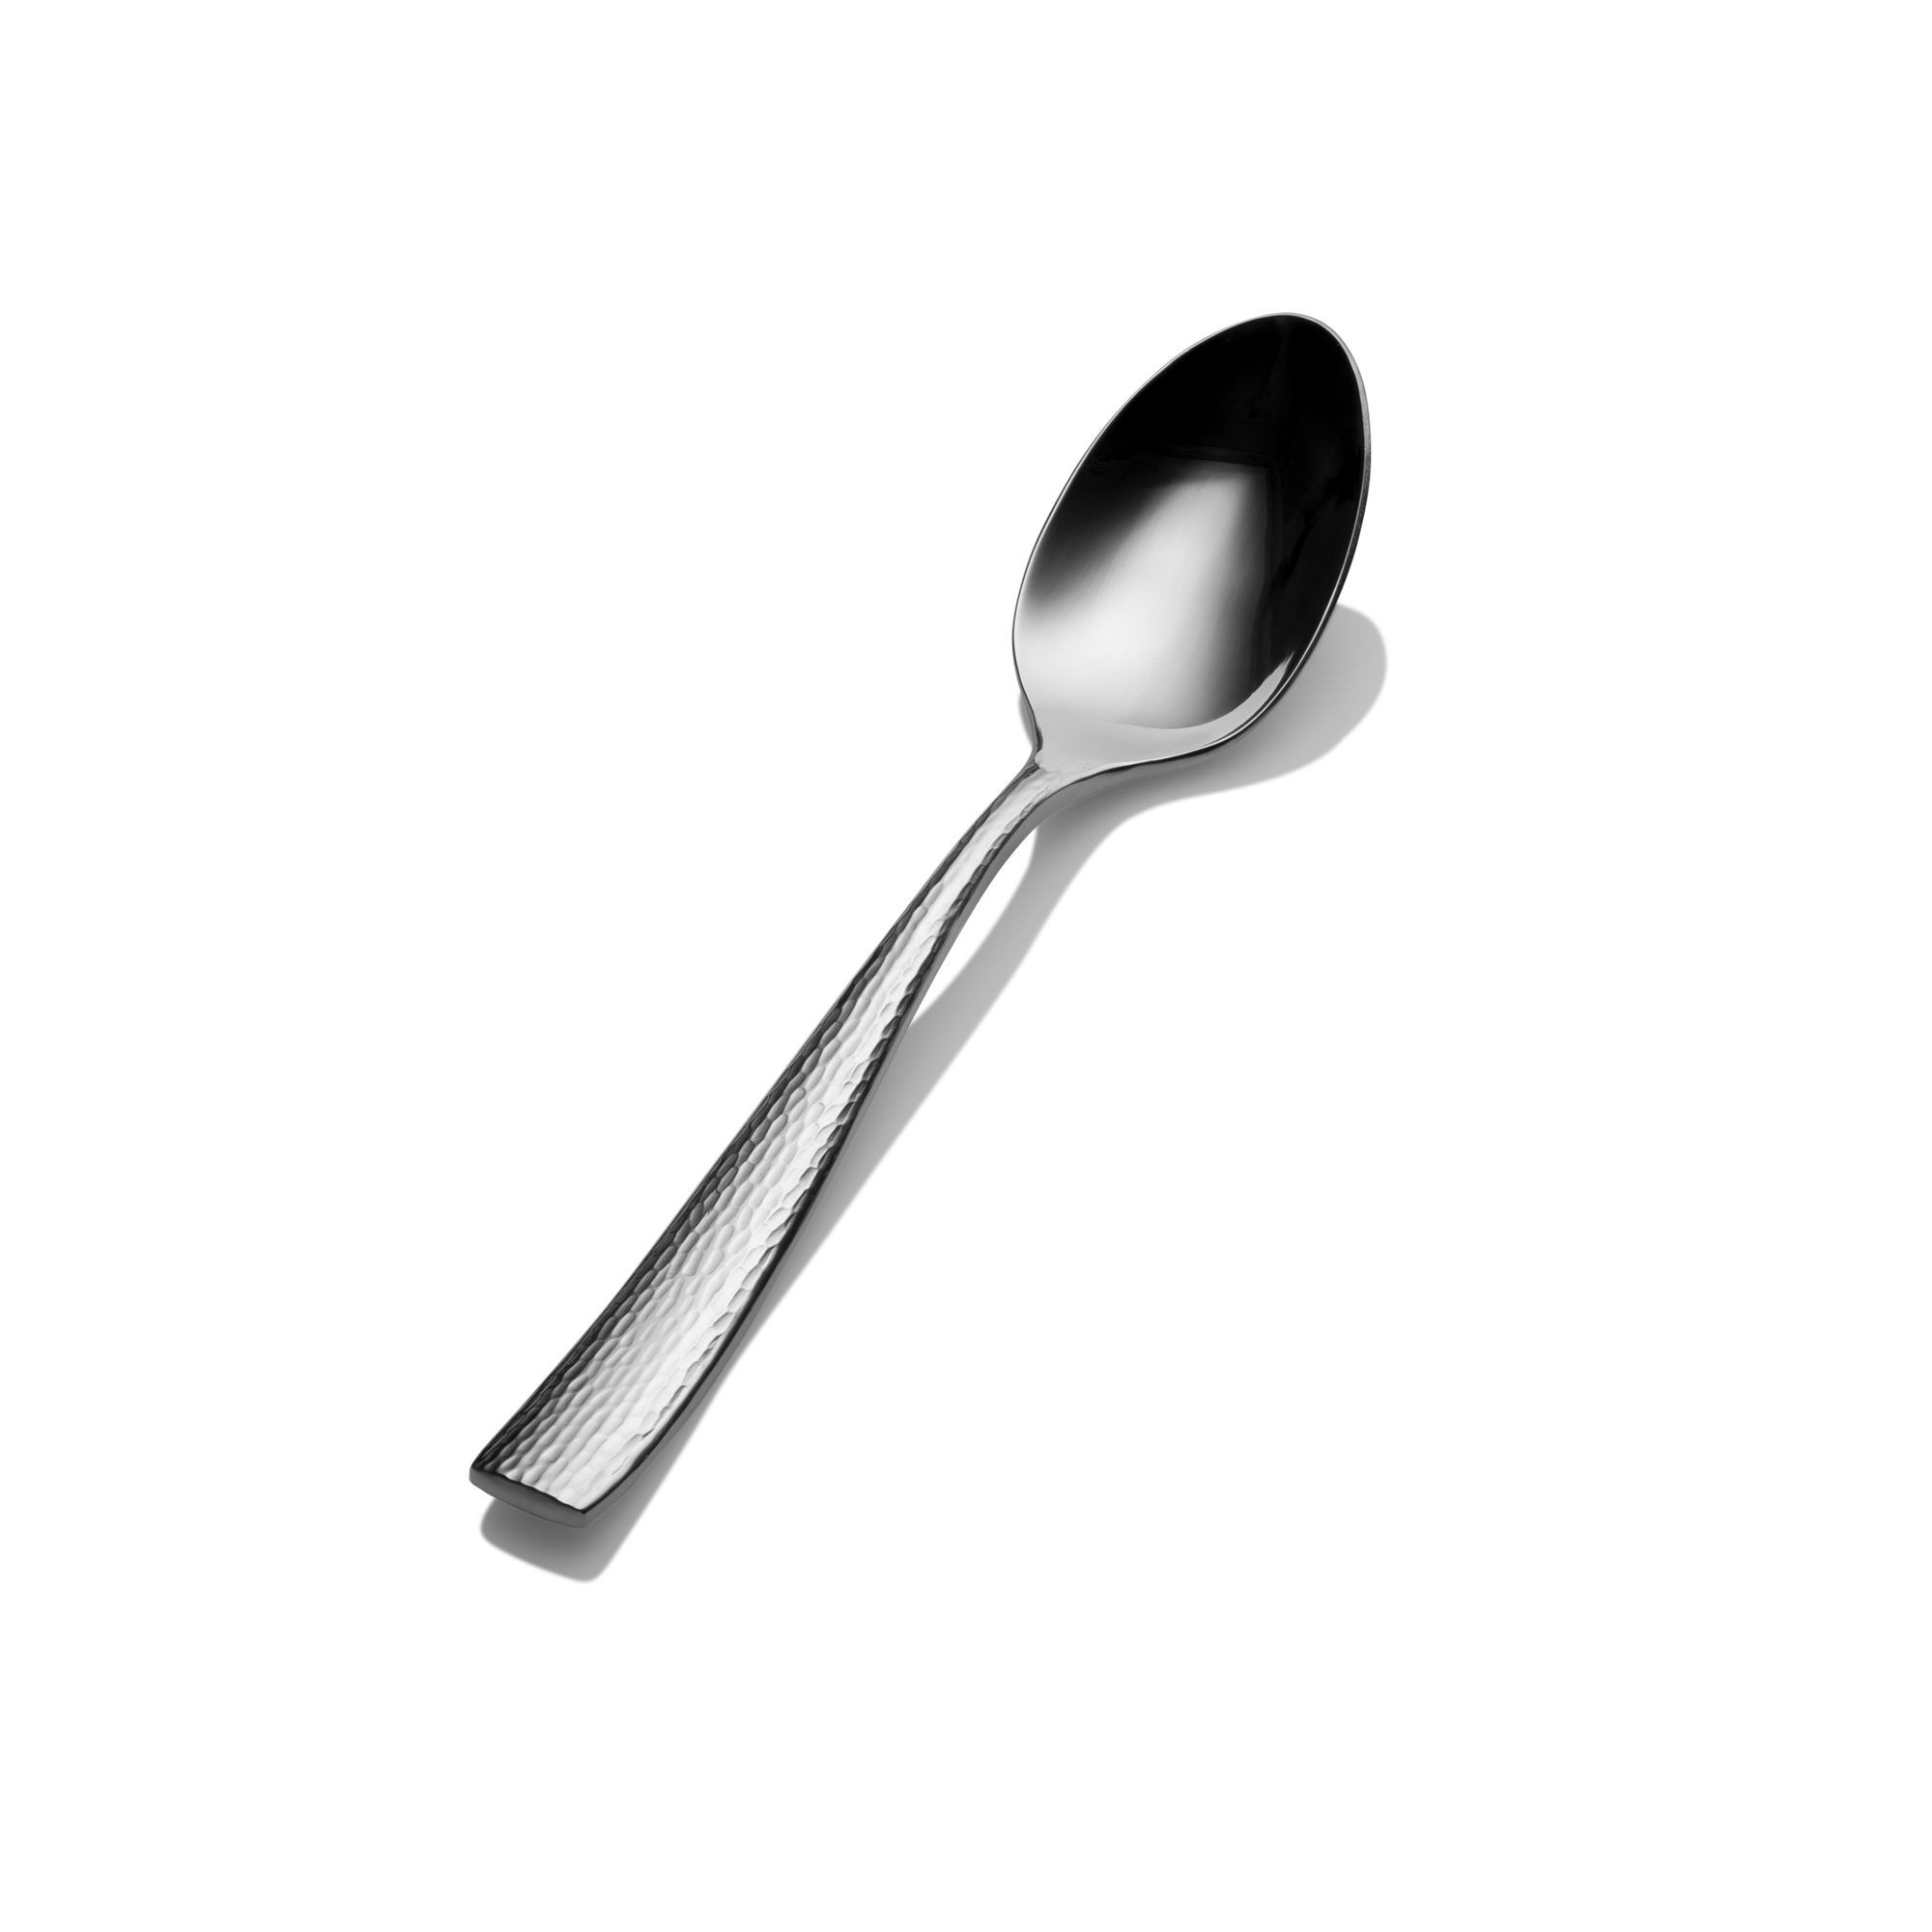 Bon Chef S3903S Scarlett 18/8 Stainless Steel Silverplated Soup and Dessert Spoon